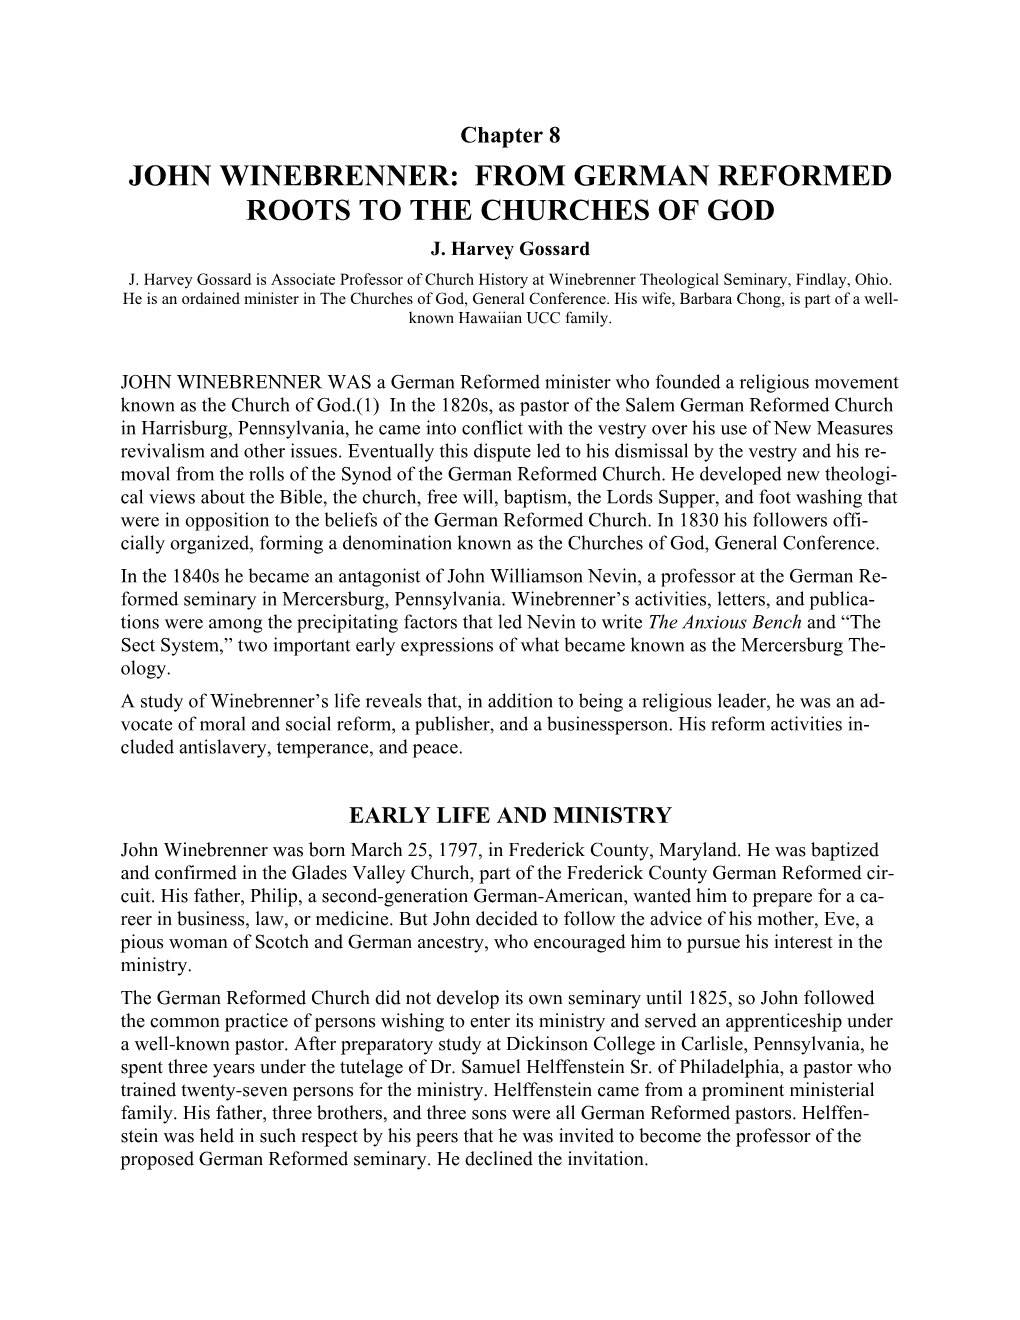 John Winebrenner: from German Reformed Roots to the Churches of God J